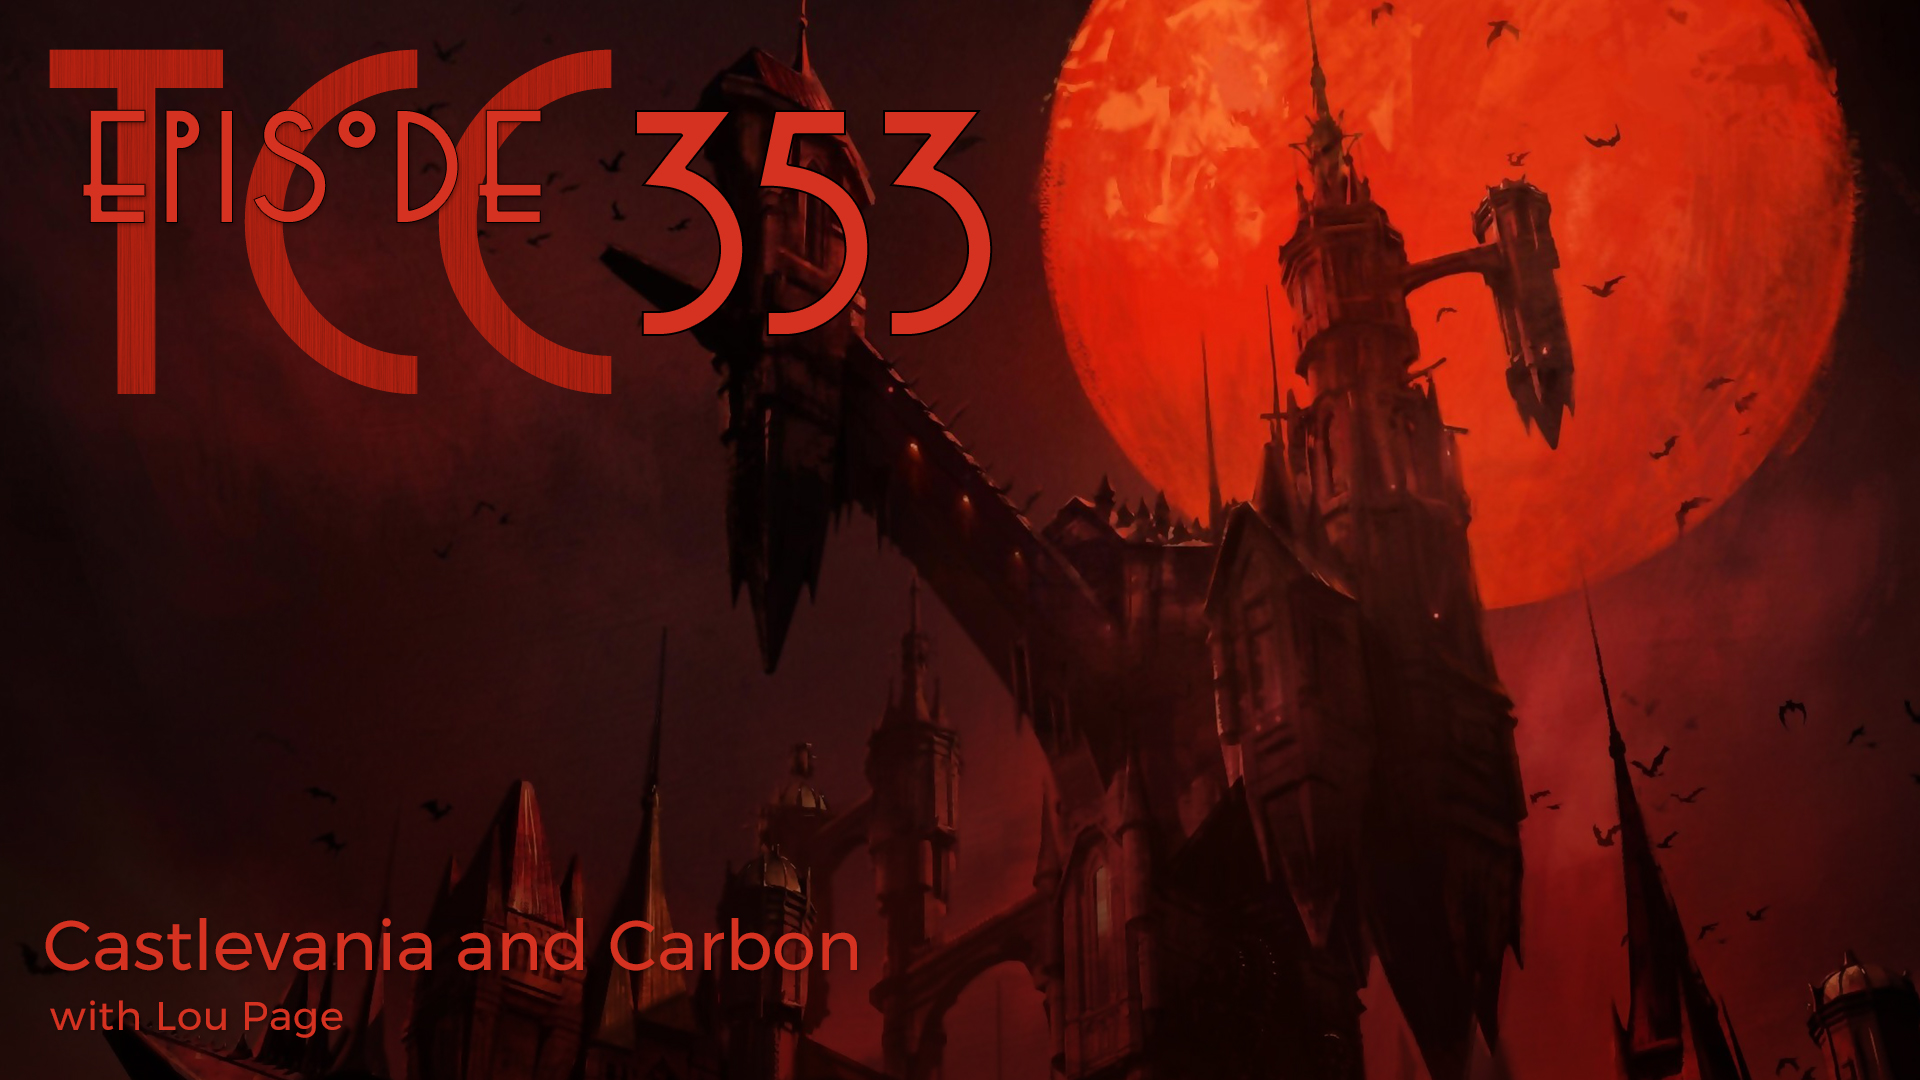 The Citadel Cafe 353: Castlevania and Carbon